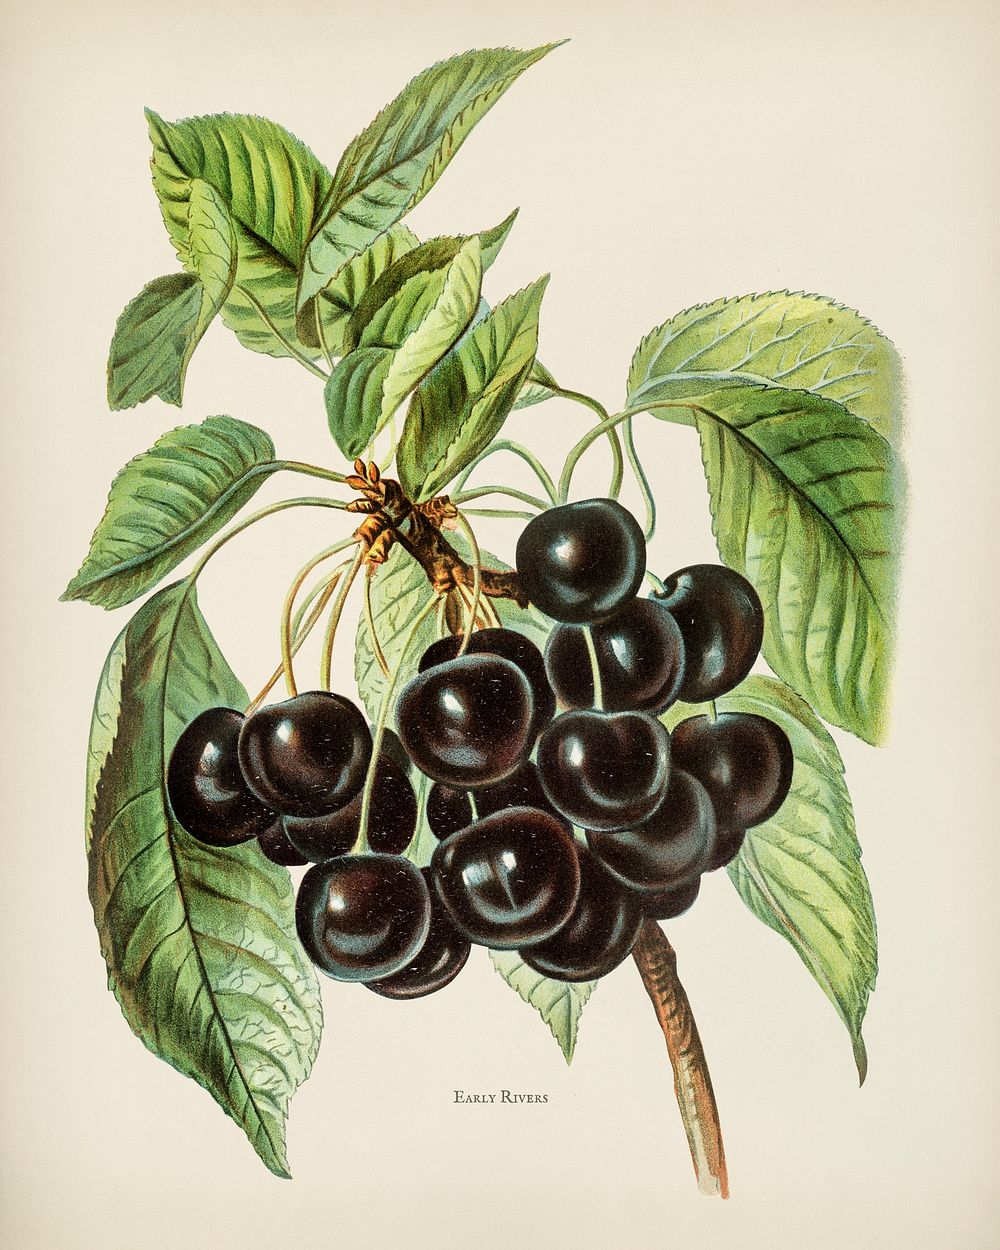 The fruit grower's guide : Vintage illustration of early rivers cherries